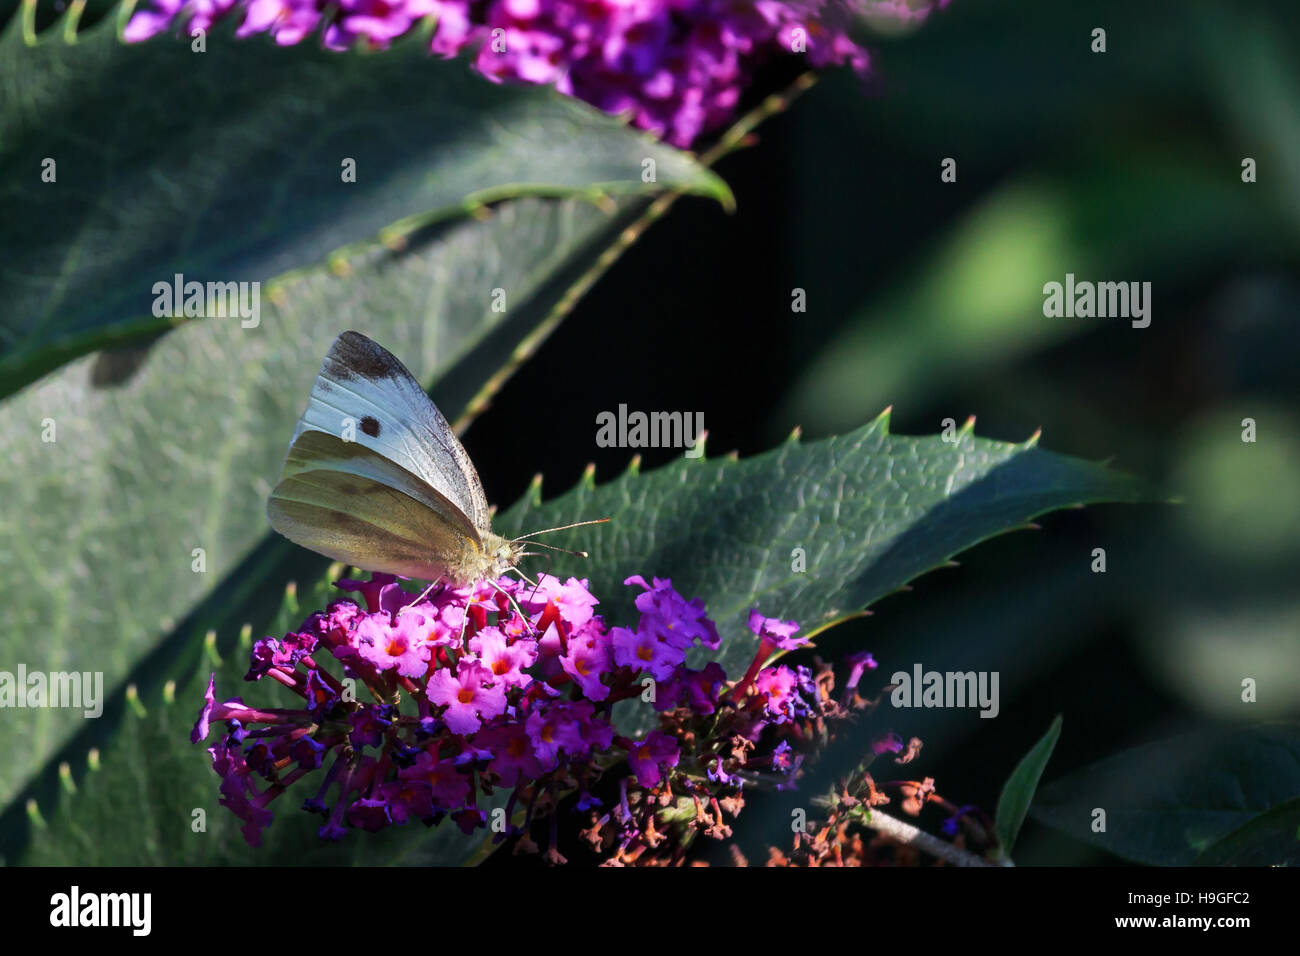 Small white Butterfly resting on a sun-lit leave in a UK garden Stock Photo